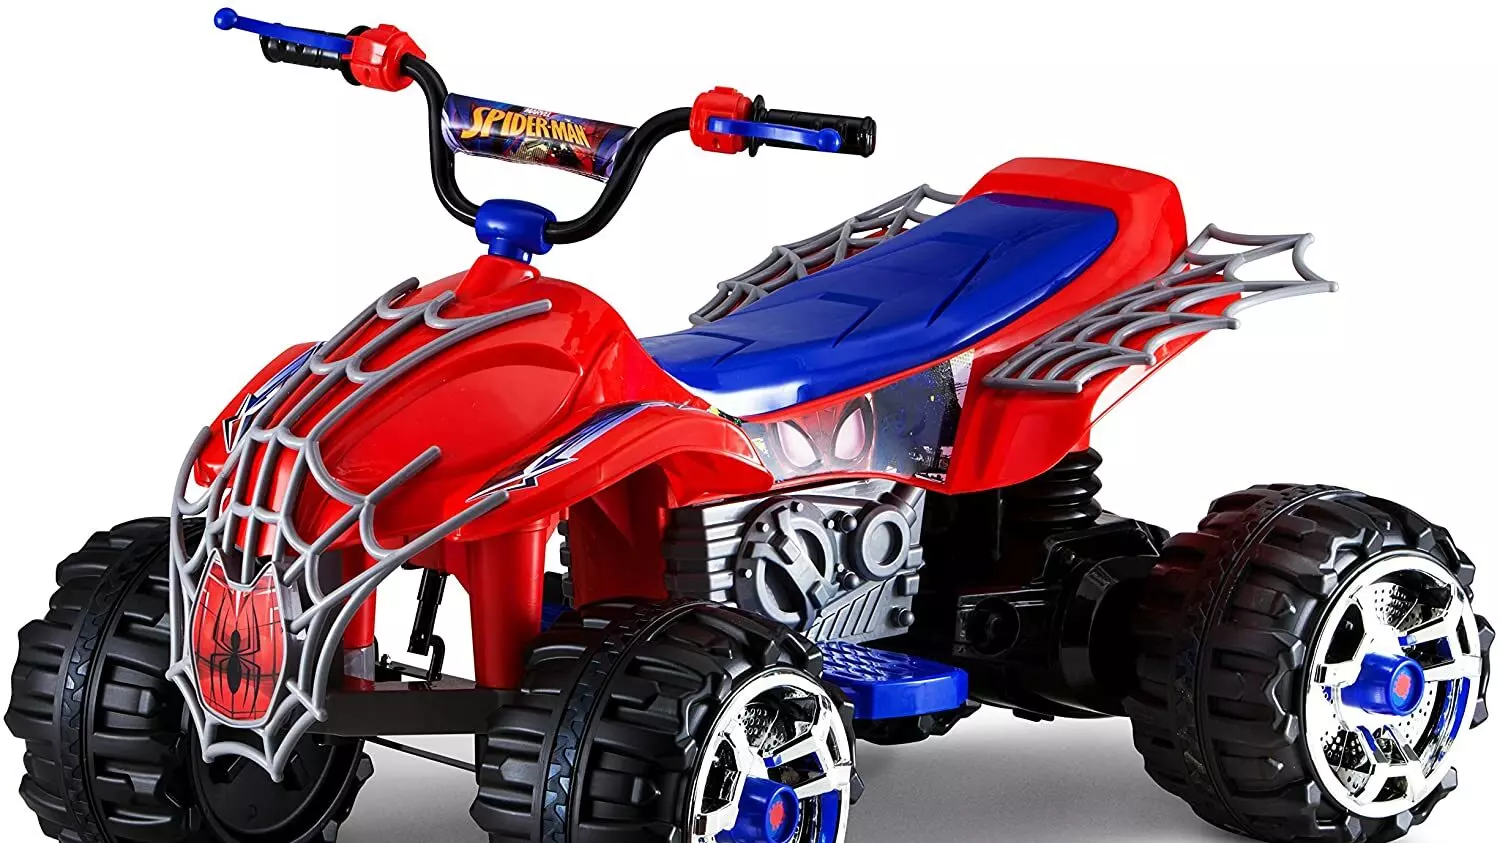 The Best ATV for Kids (Review) in 2022